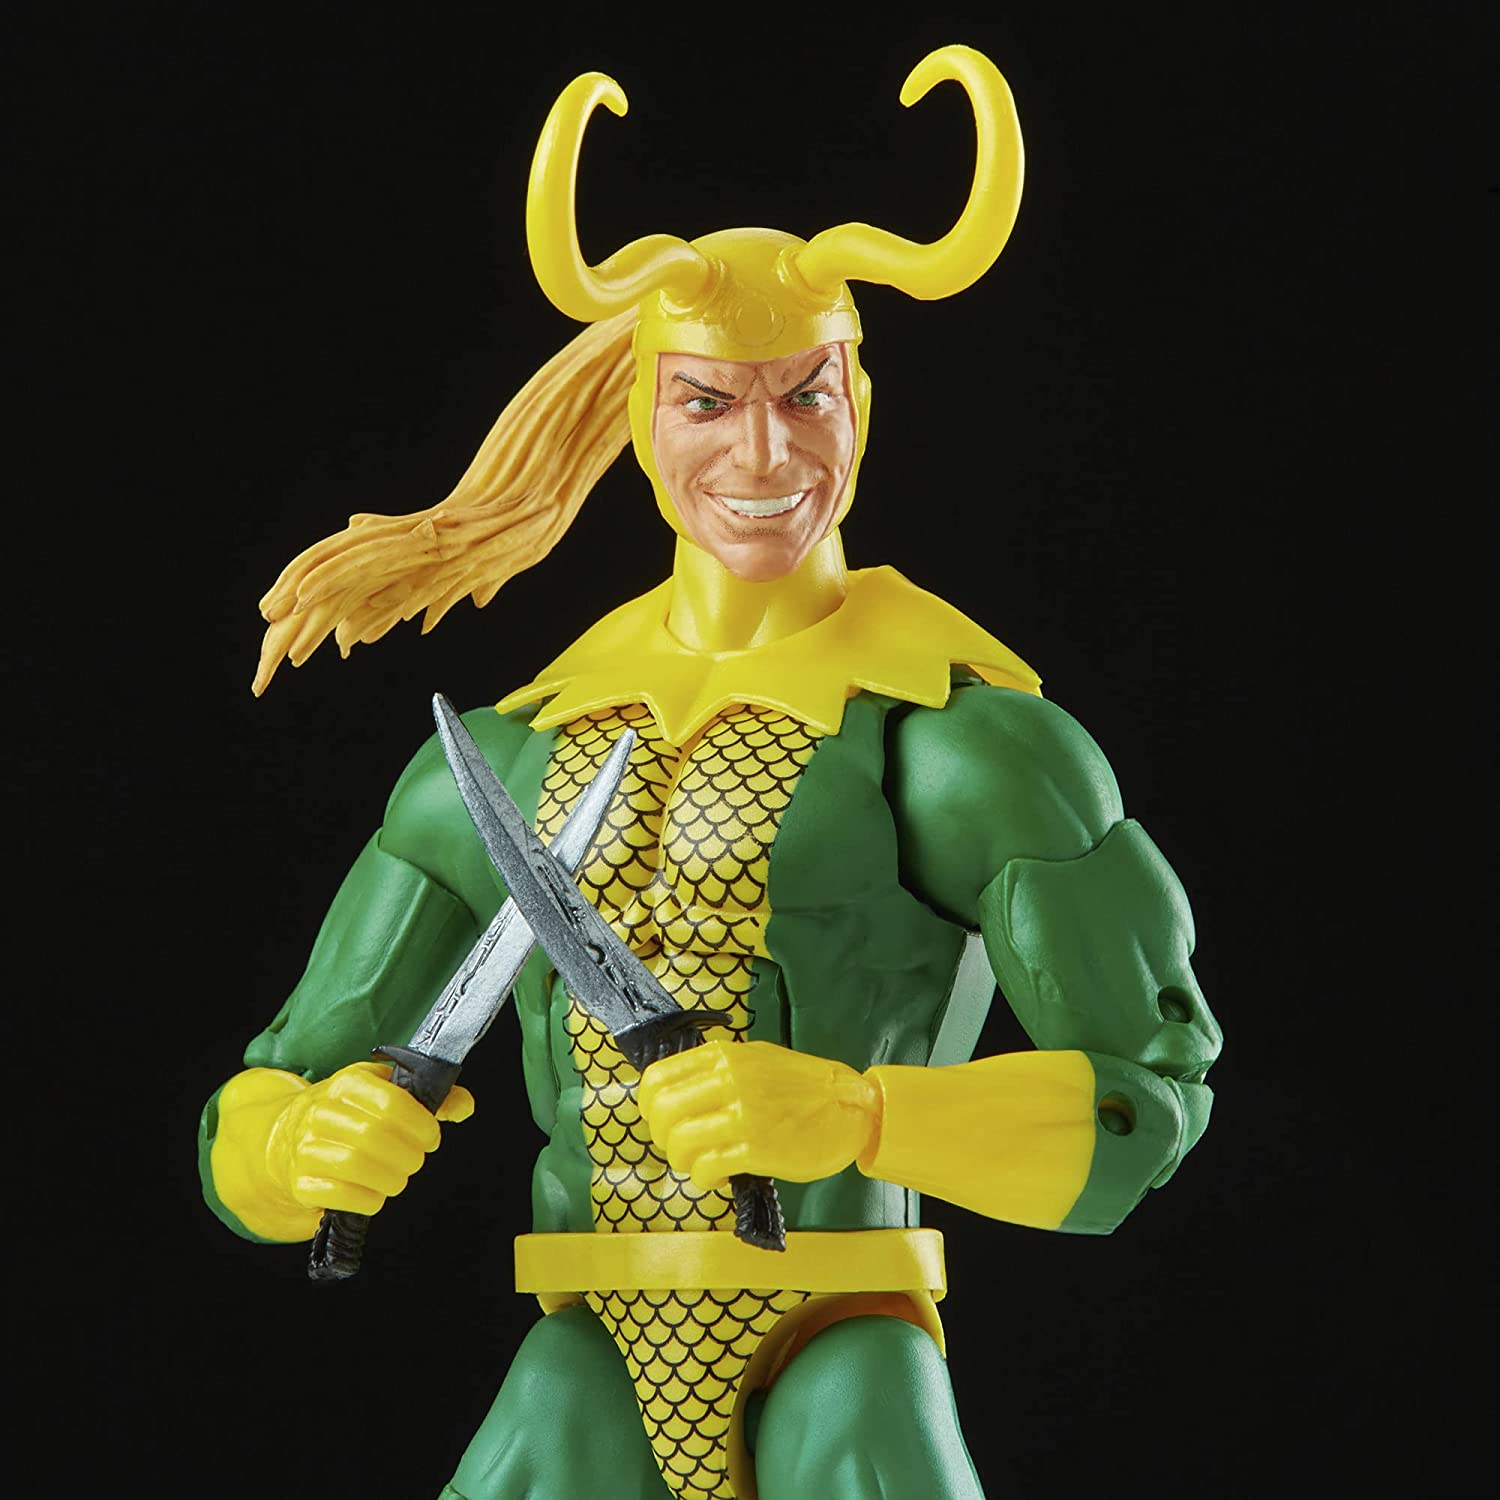 Marvel Legends Series Loki 6-inch Retro Packaging Action Figure Toy, 3 Accessories